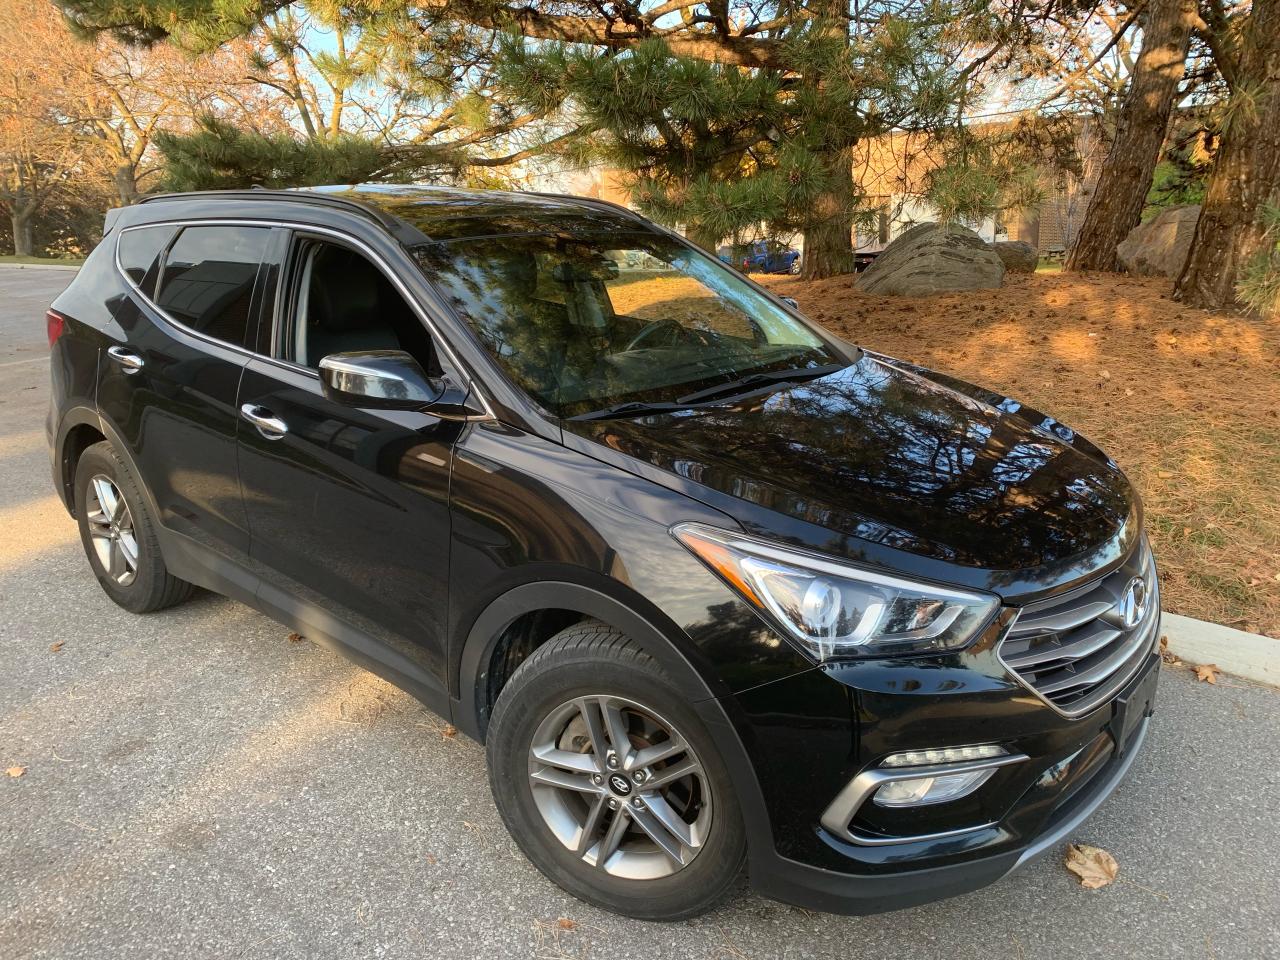 2017 Hyundai Santa Fe Sport SPORT SE - PANORAMIC ROOF/LEATHER/FULLY EQUIPPED! - Photo #1